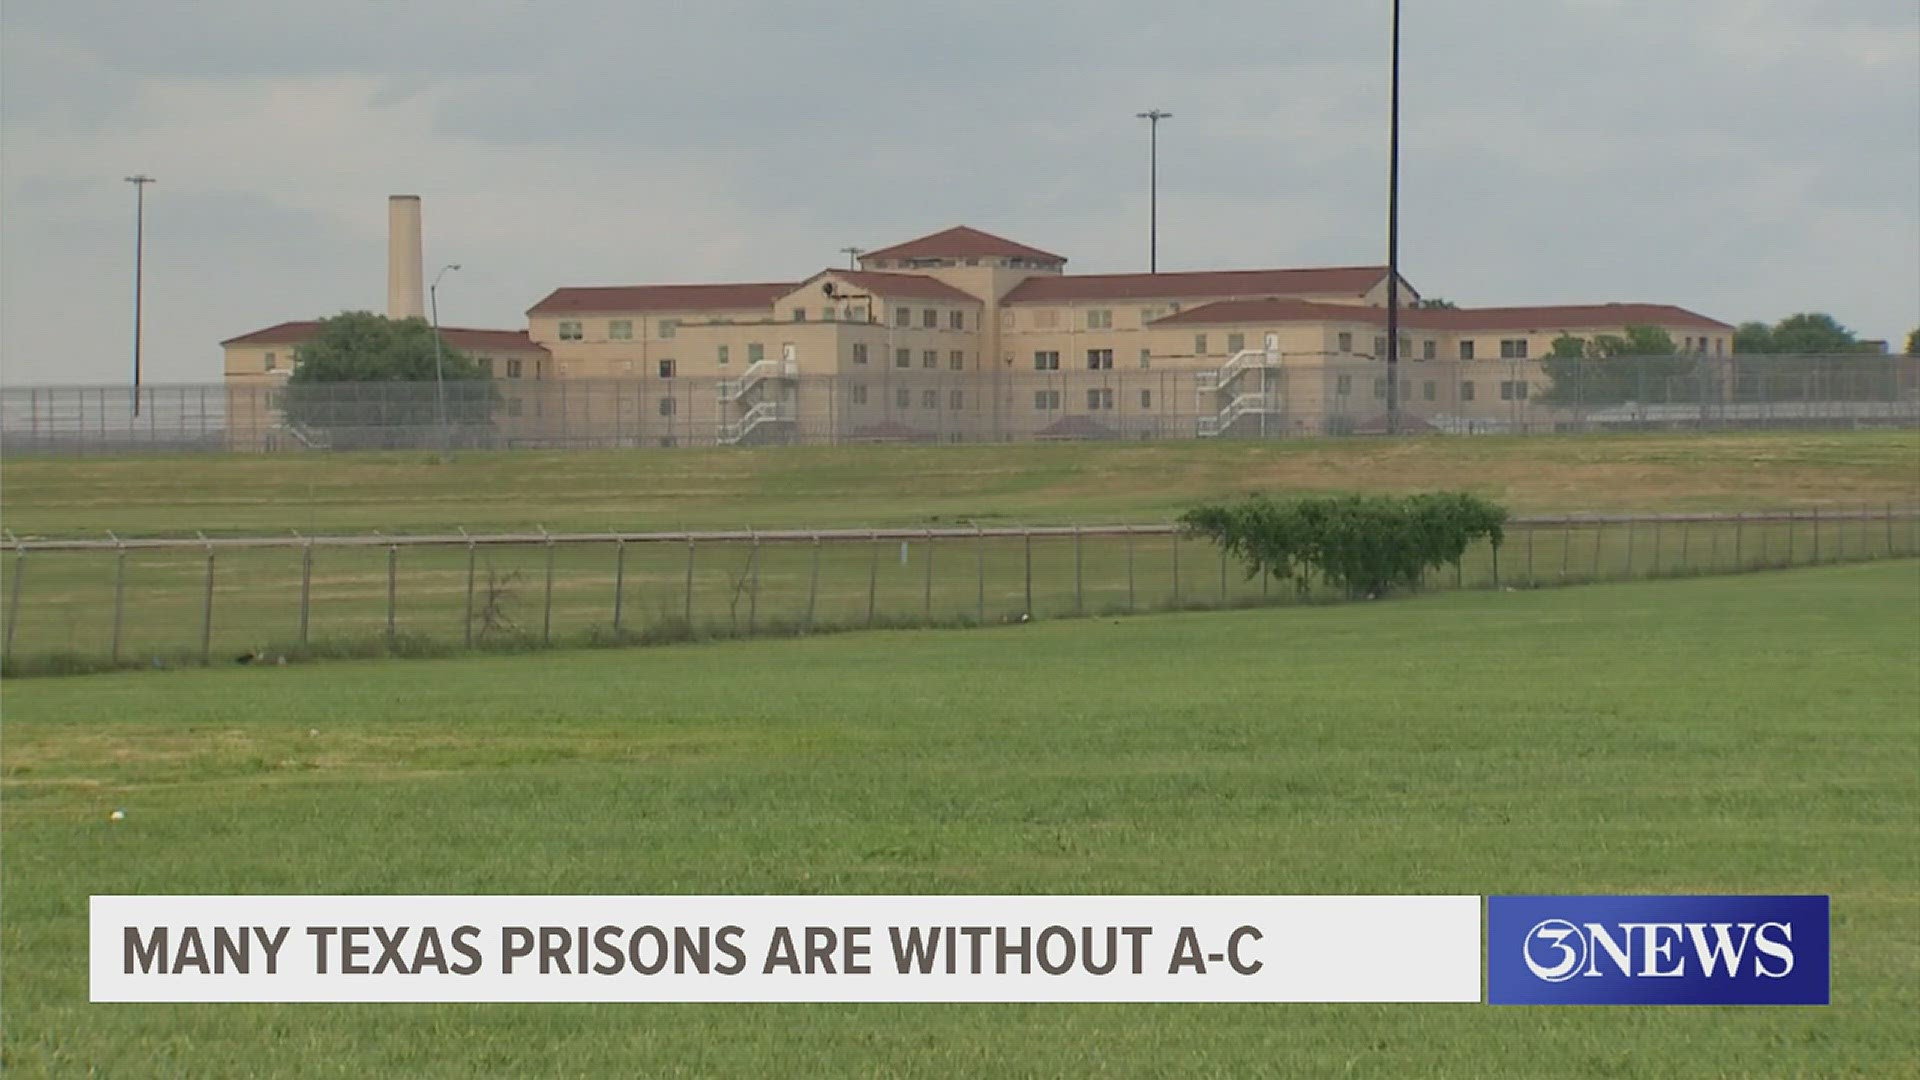 Since a heat wave gripped Texas, at least nine inmates, including two in their 30s, have died of heart attacks or unknown causes in prisons lacking air conditioning.